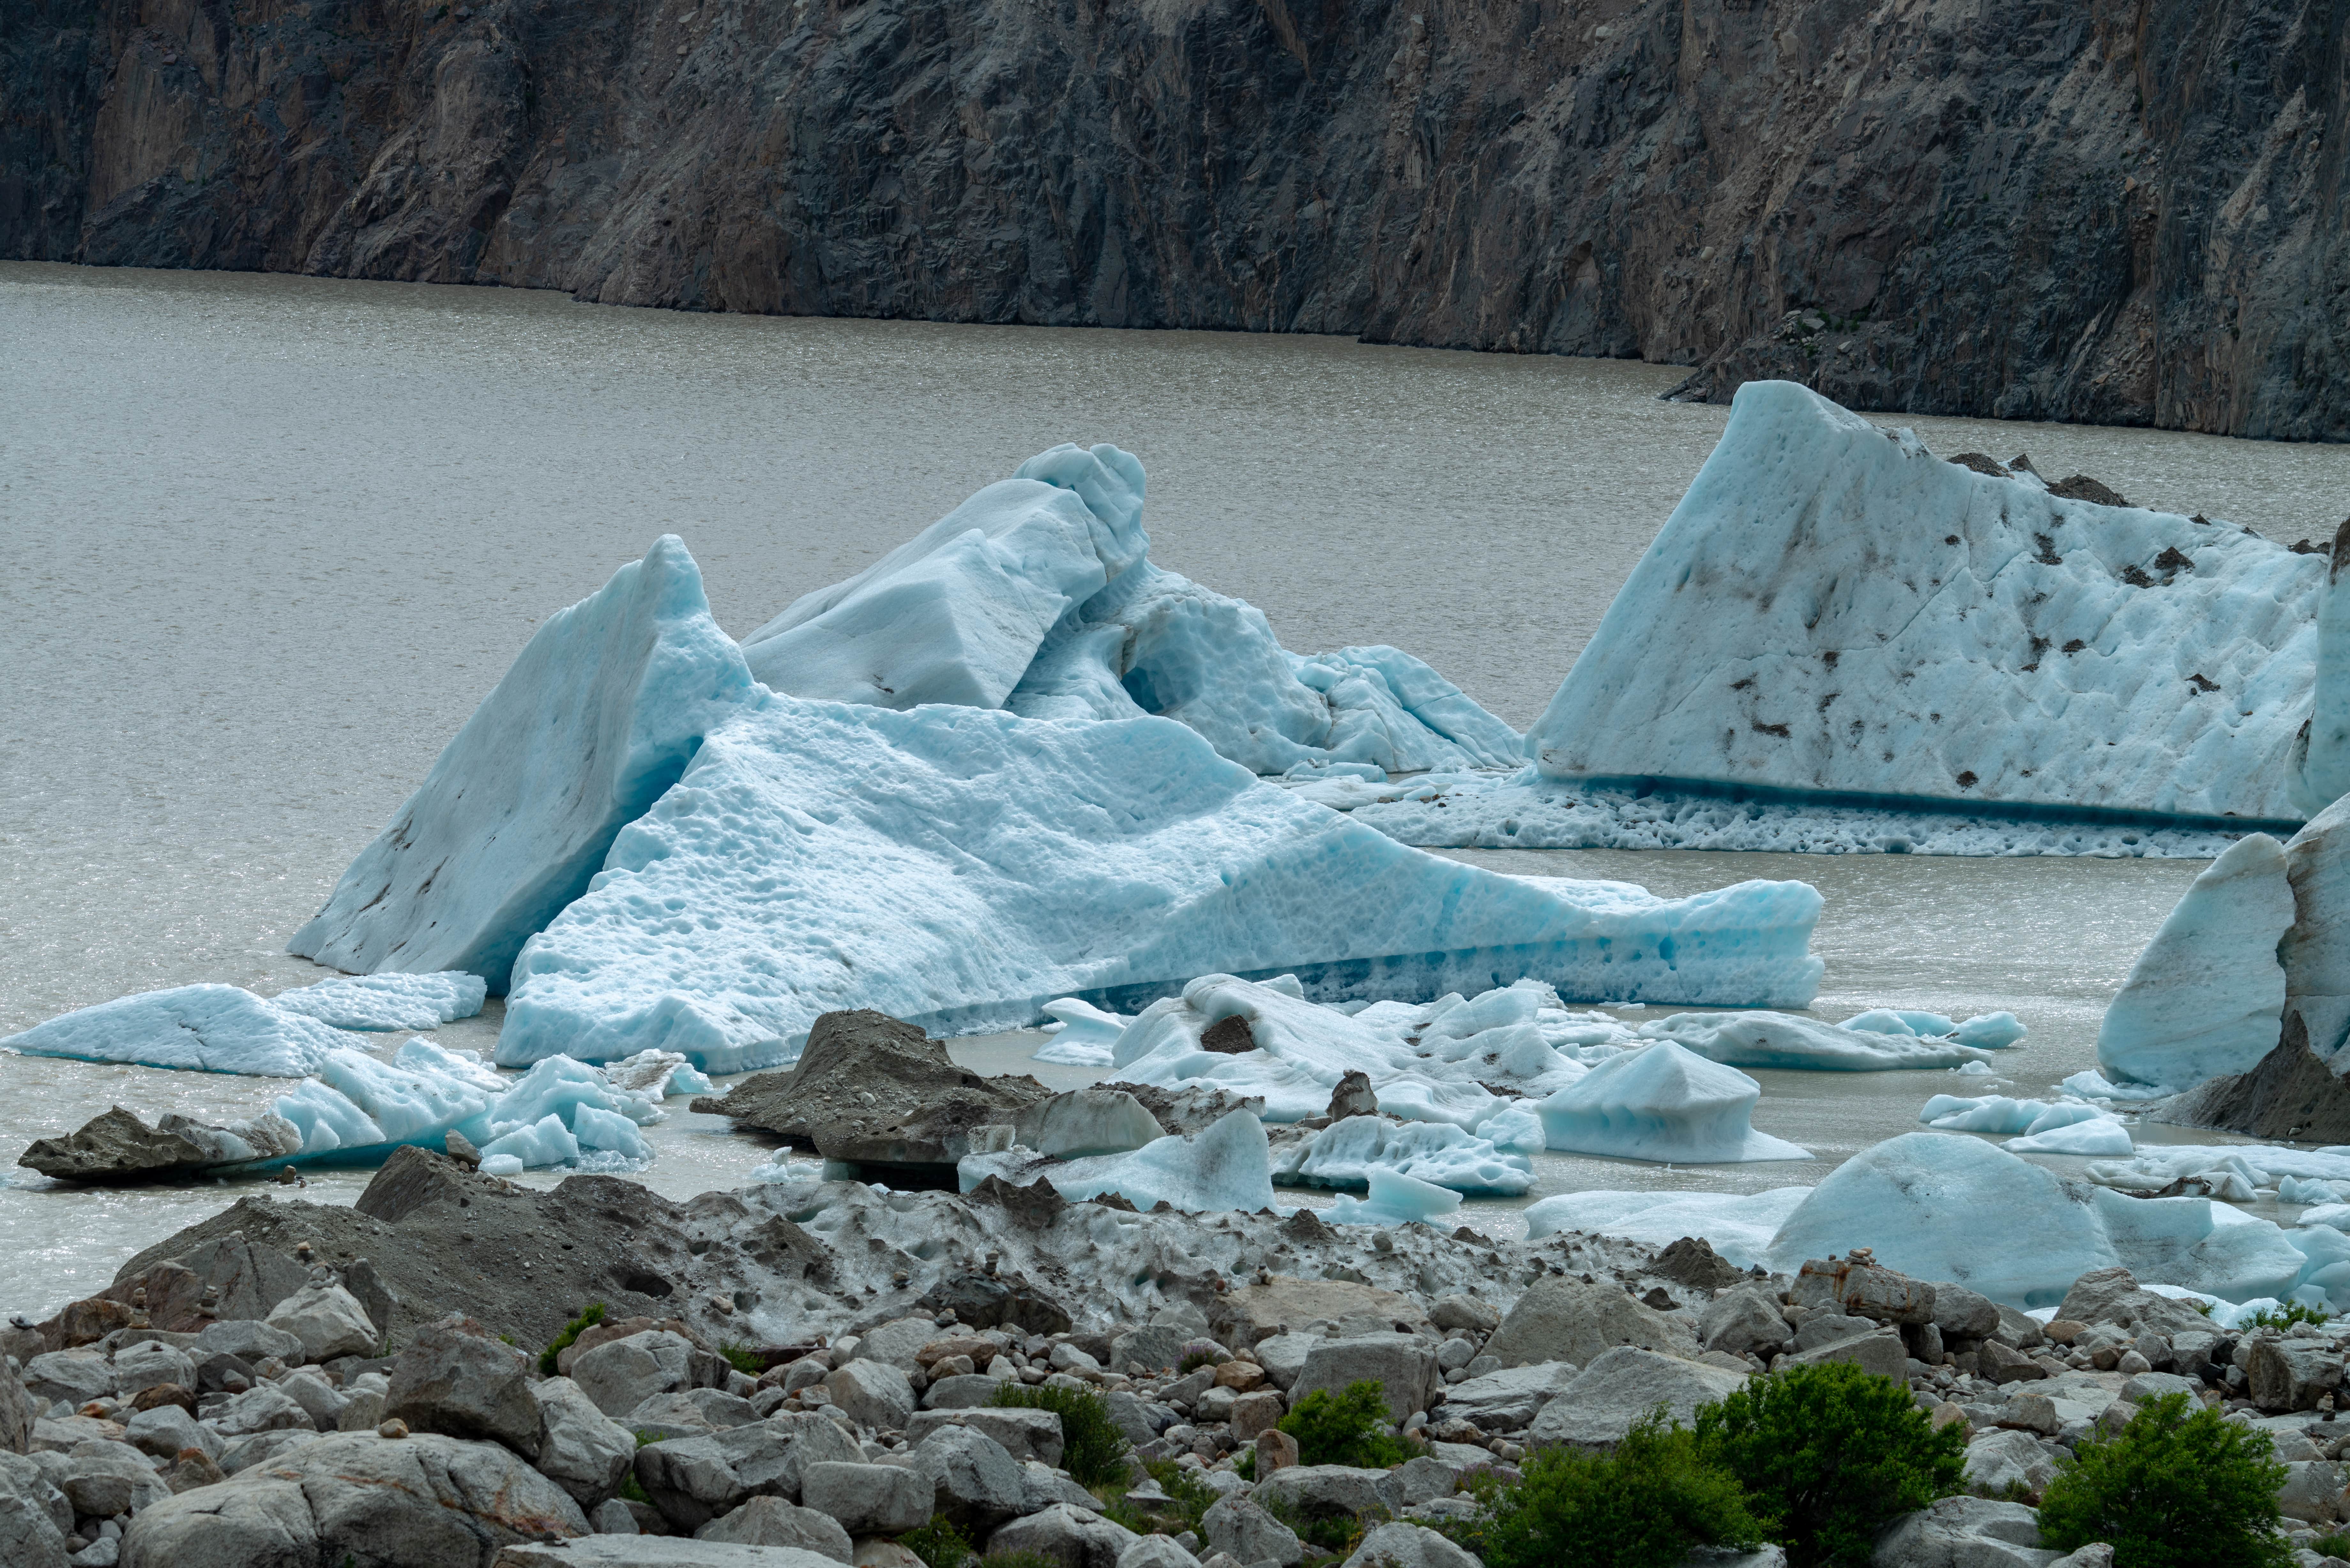 According to a study, the world's glaciers are melting quicker than ever